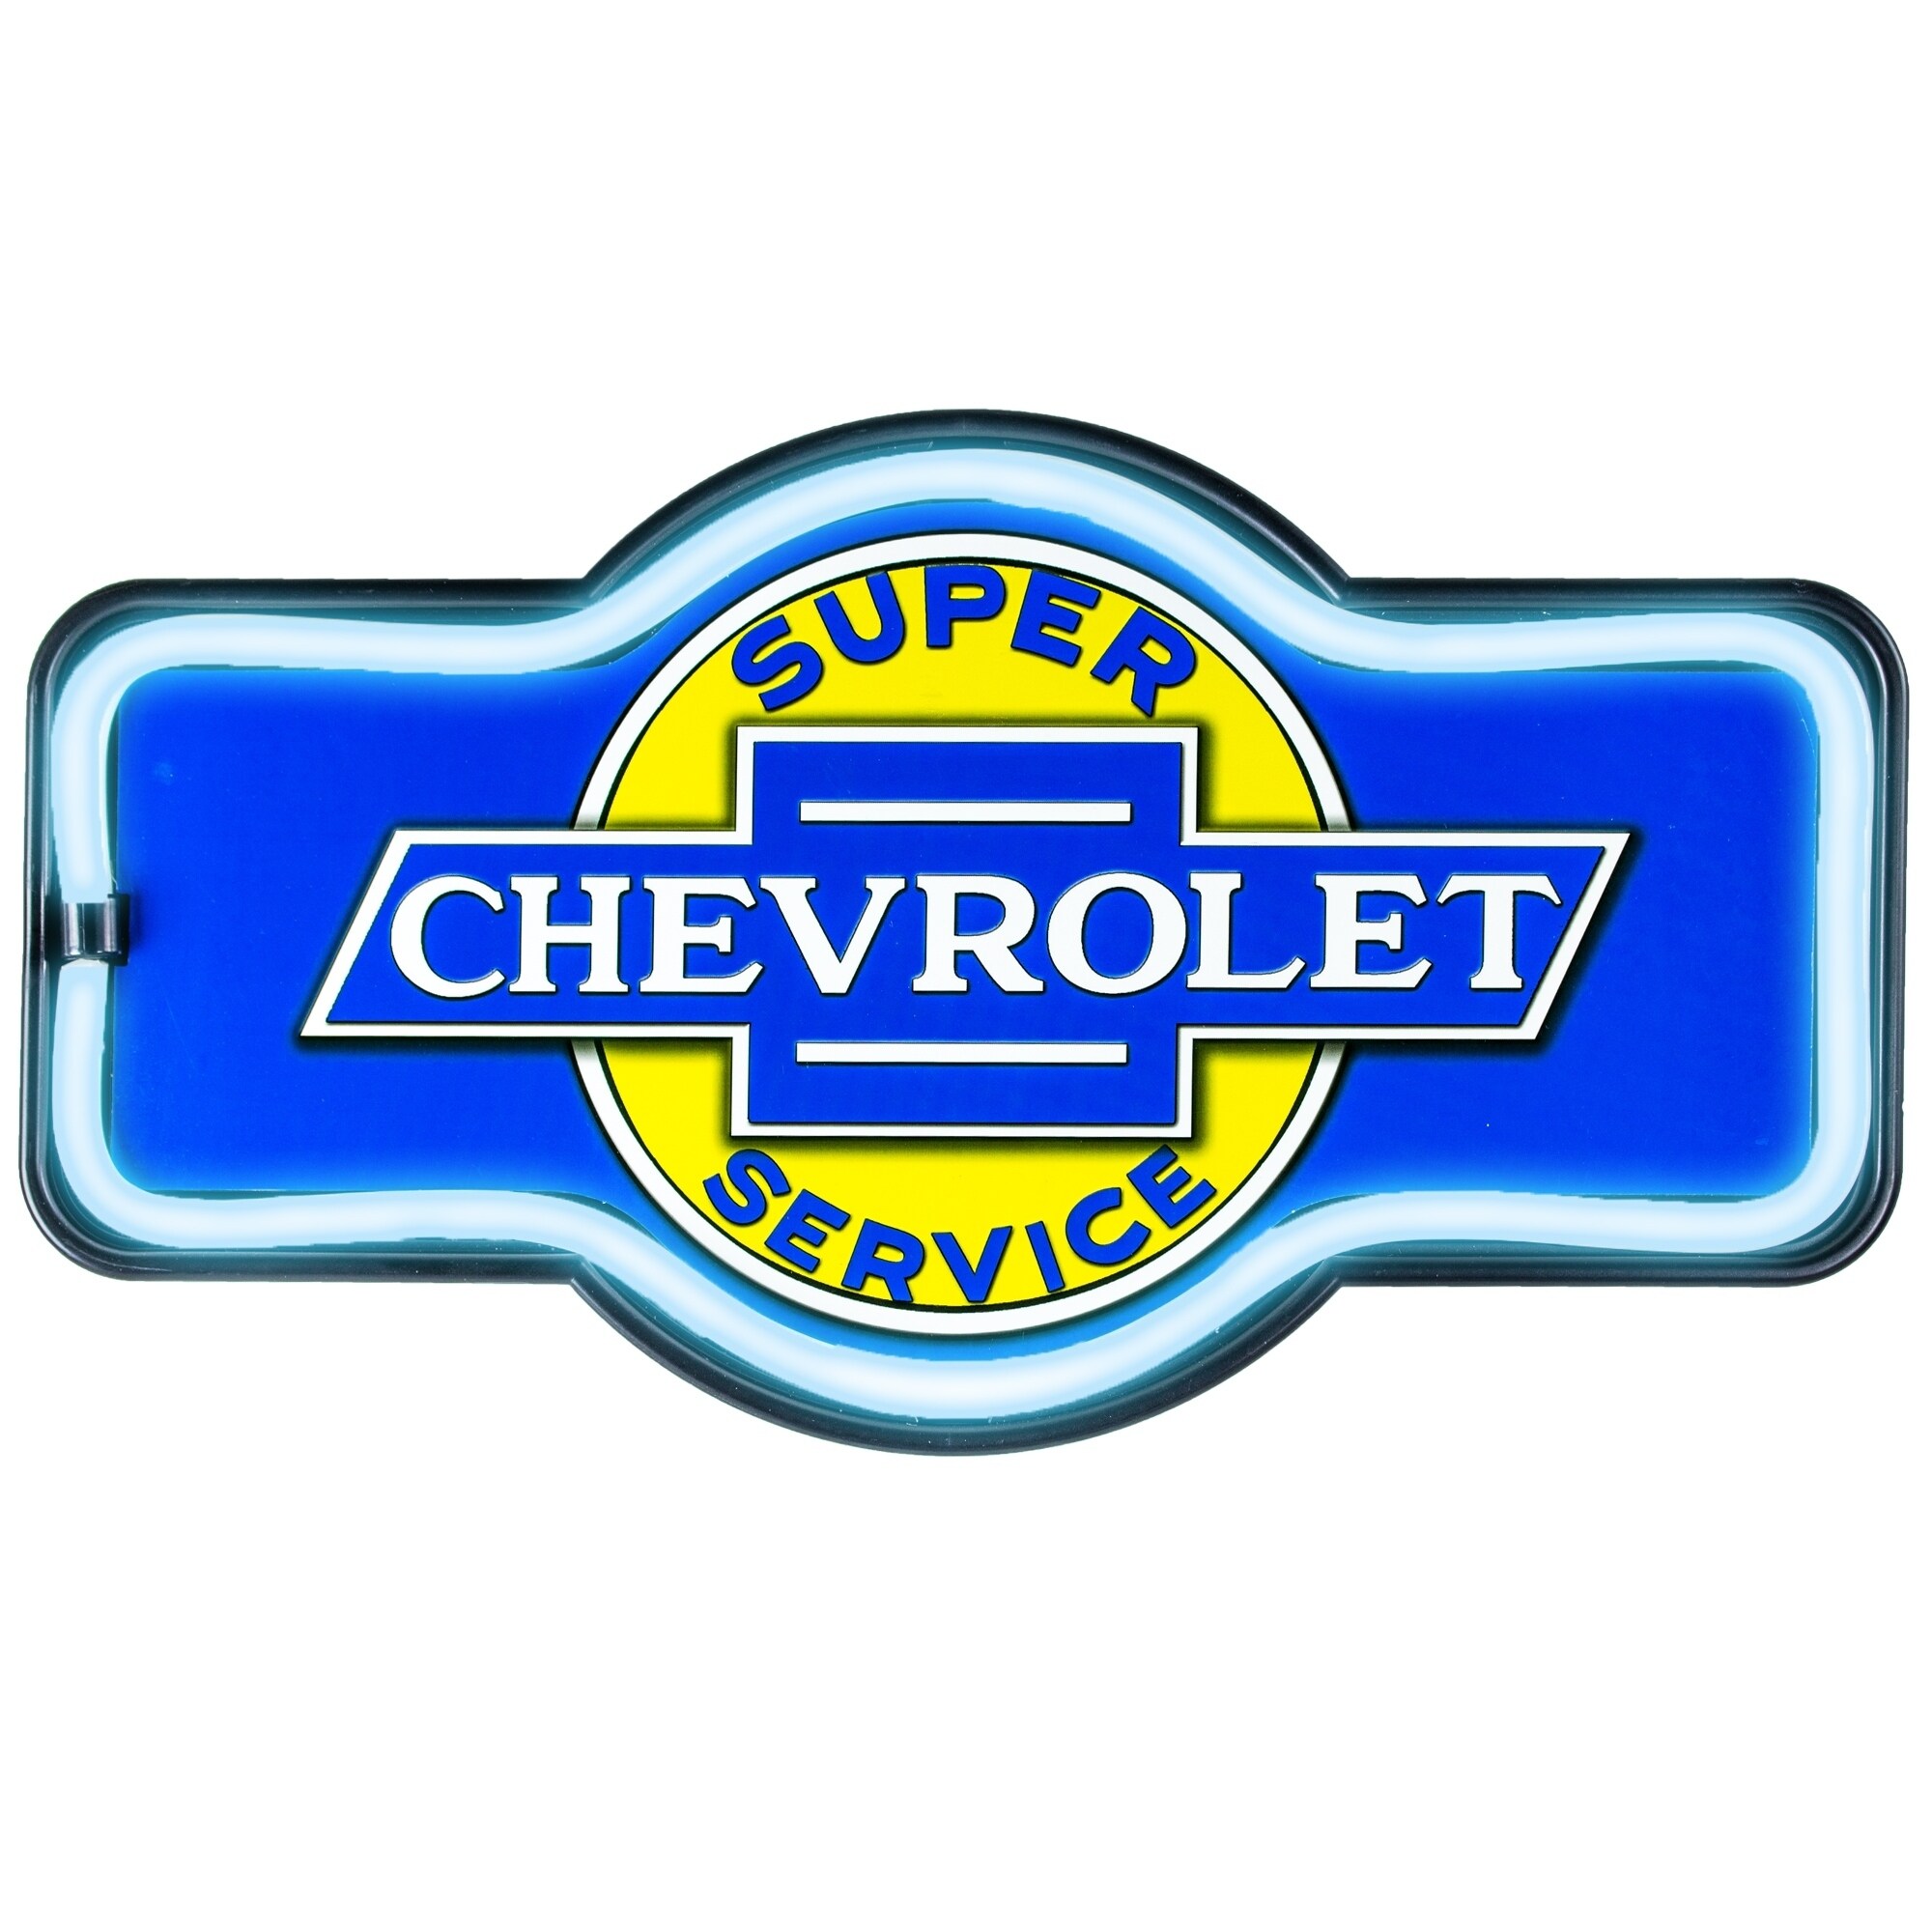 Battery Powered LED Lights 40 x 8 x 4 inches Double Sided Metal Wall Mounted Reproduction Vintage Advertising Sign Chevrolet Licensed Super Service Garage 